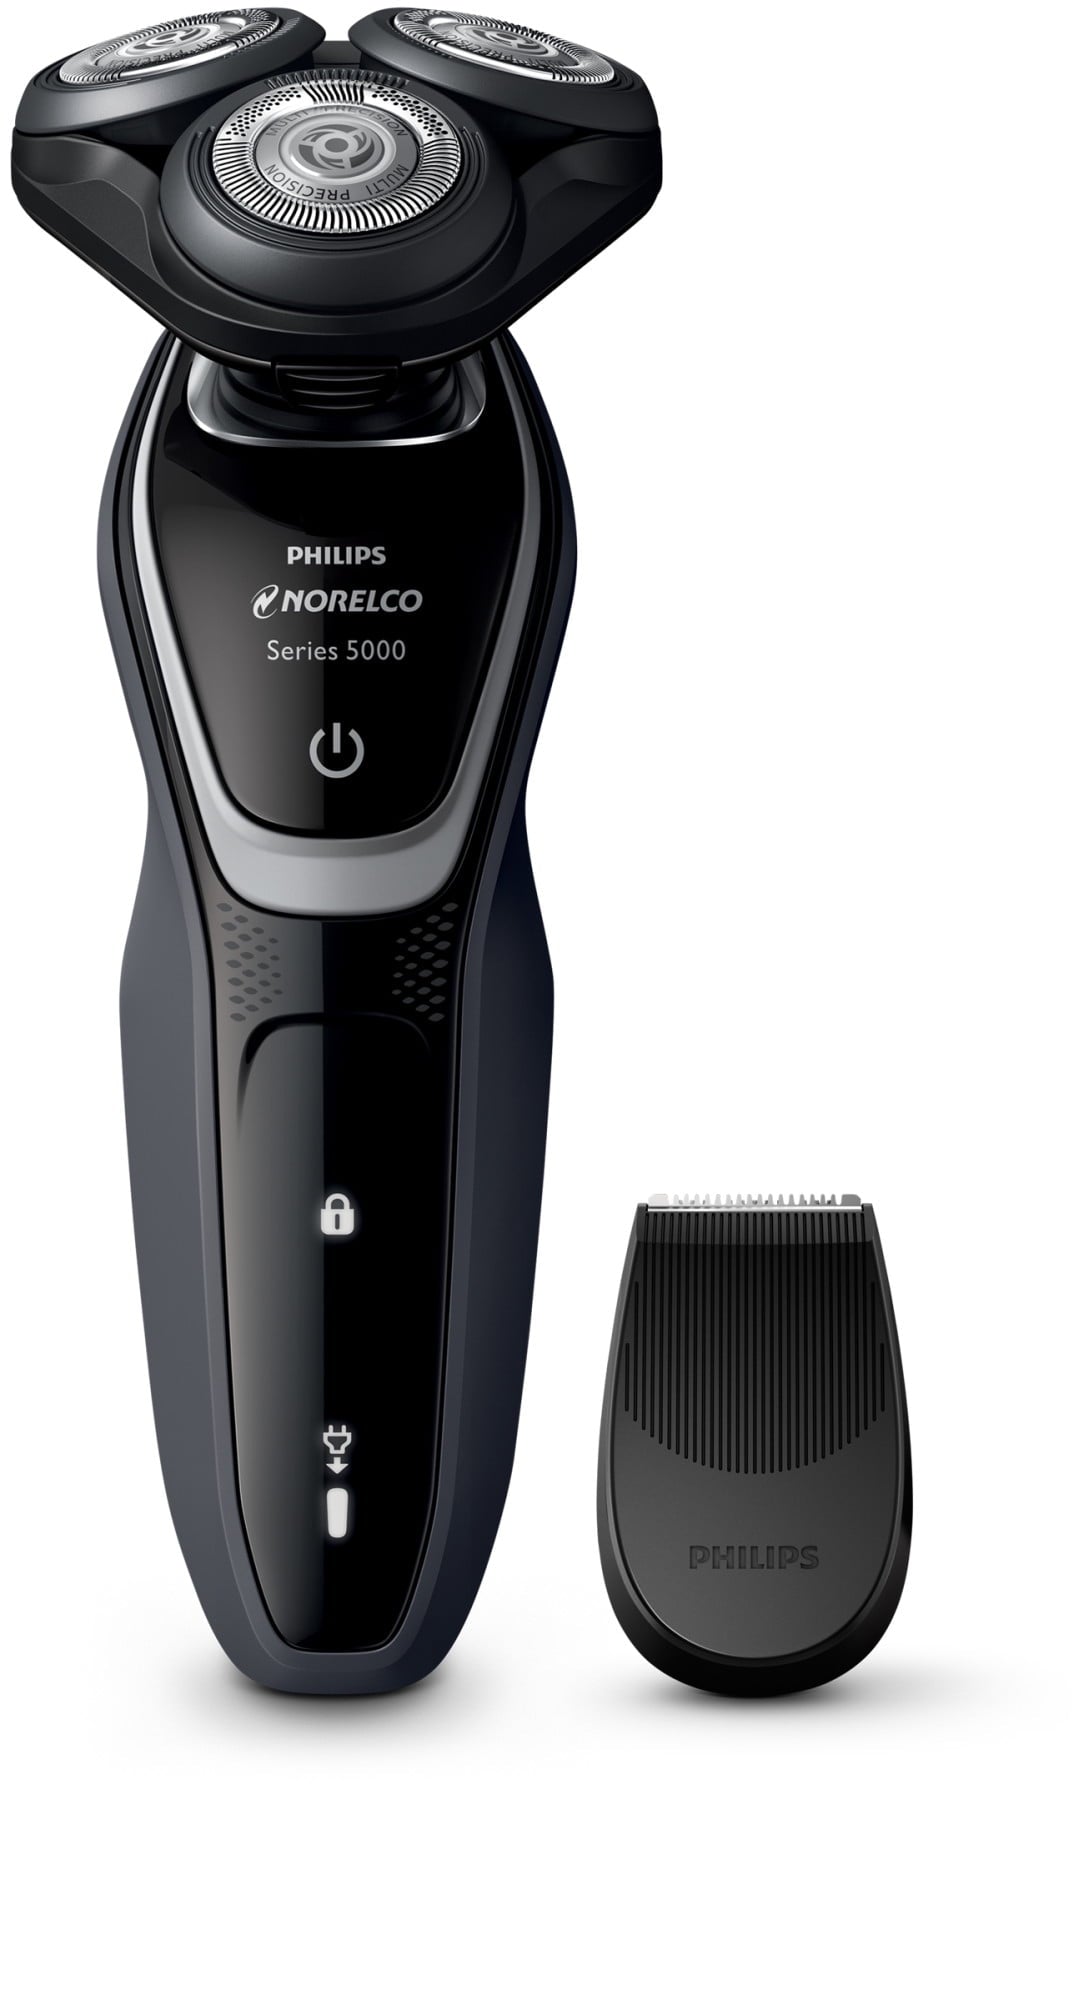 Philips Norelco 5100 Rechargeable Wet/Dry Electric Shaver S5210/81